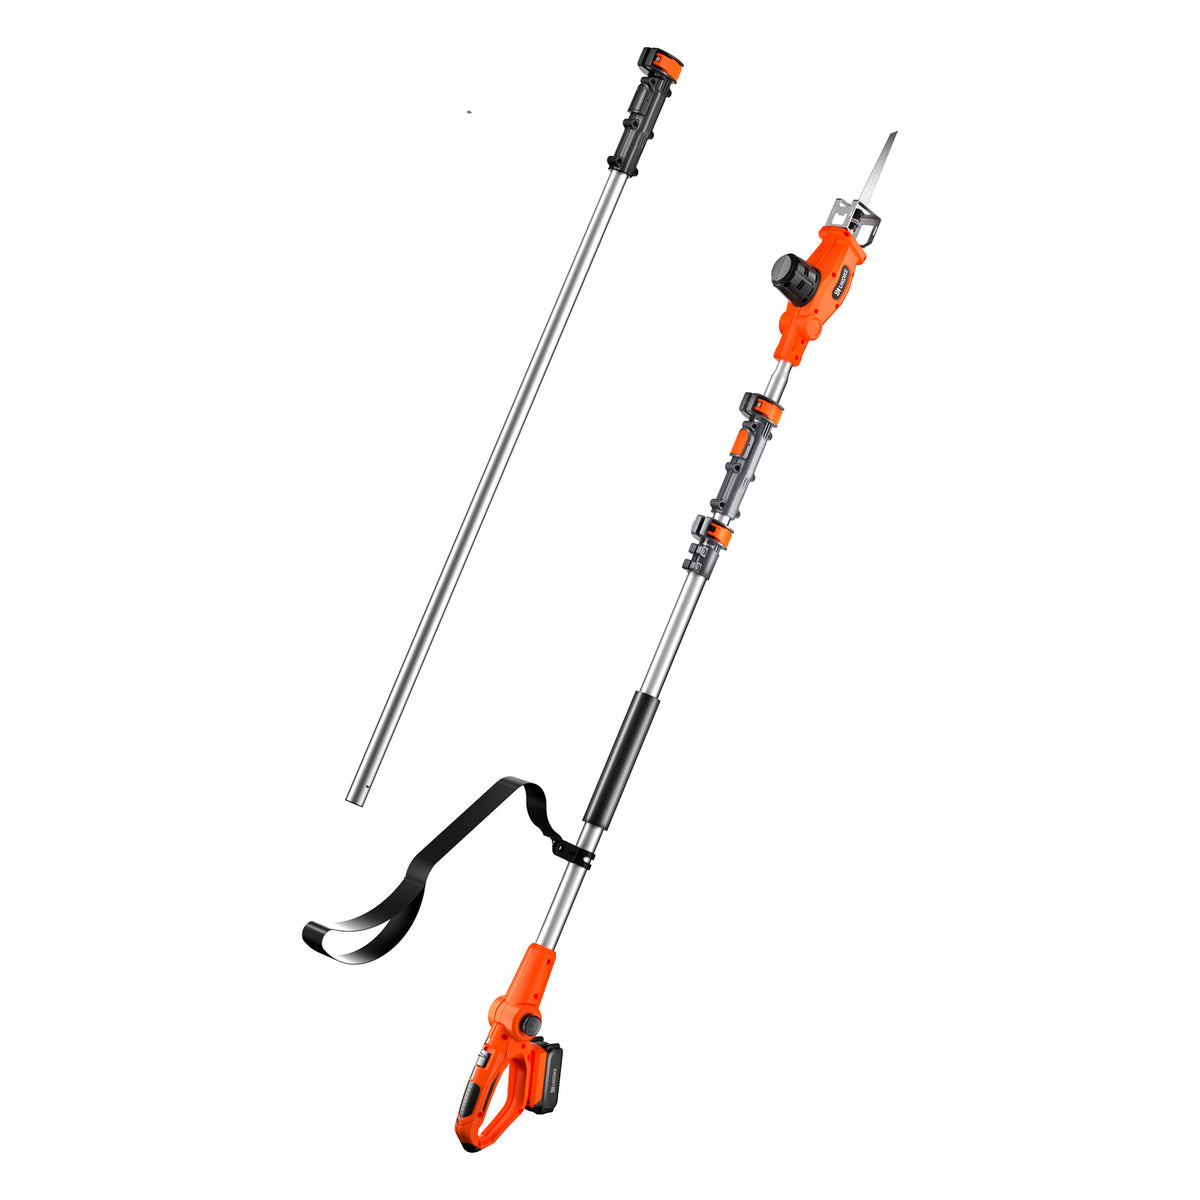  Pole Saw 8-Inch Cordless Pole Saws for Tree Trimming